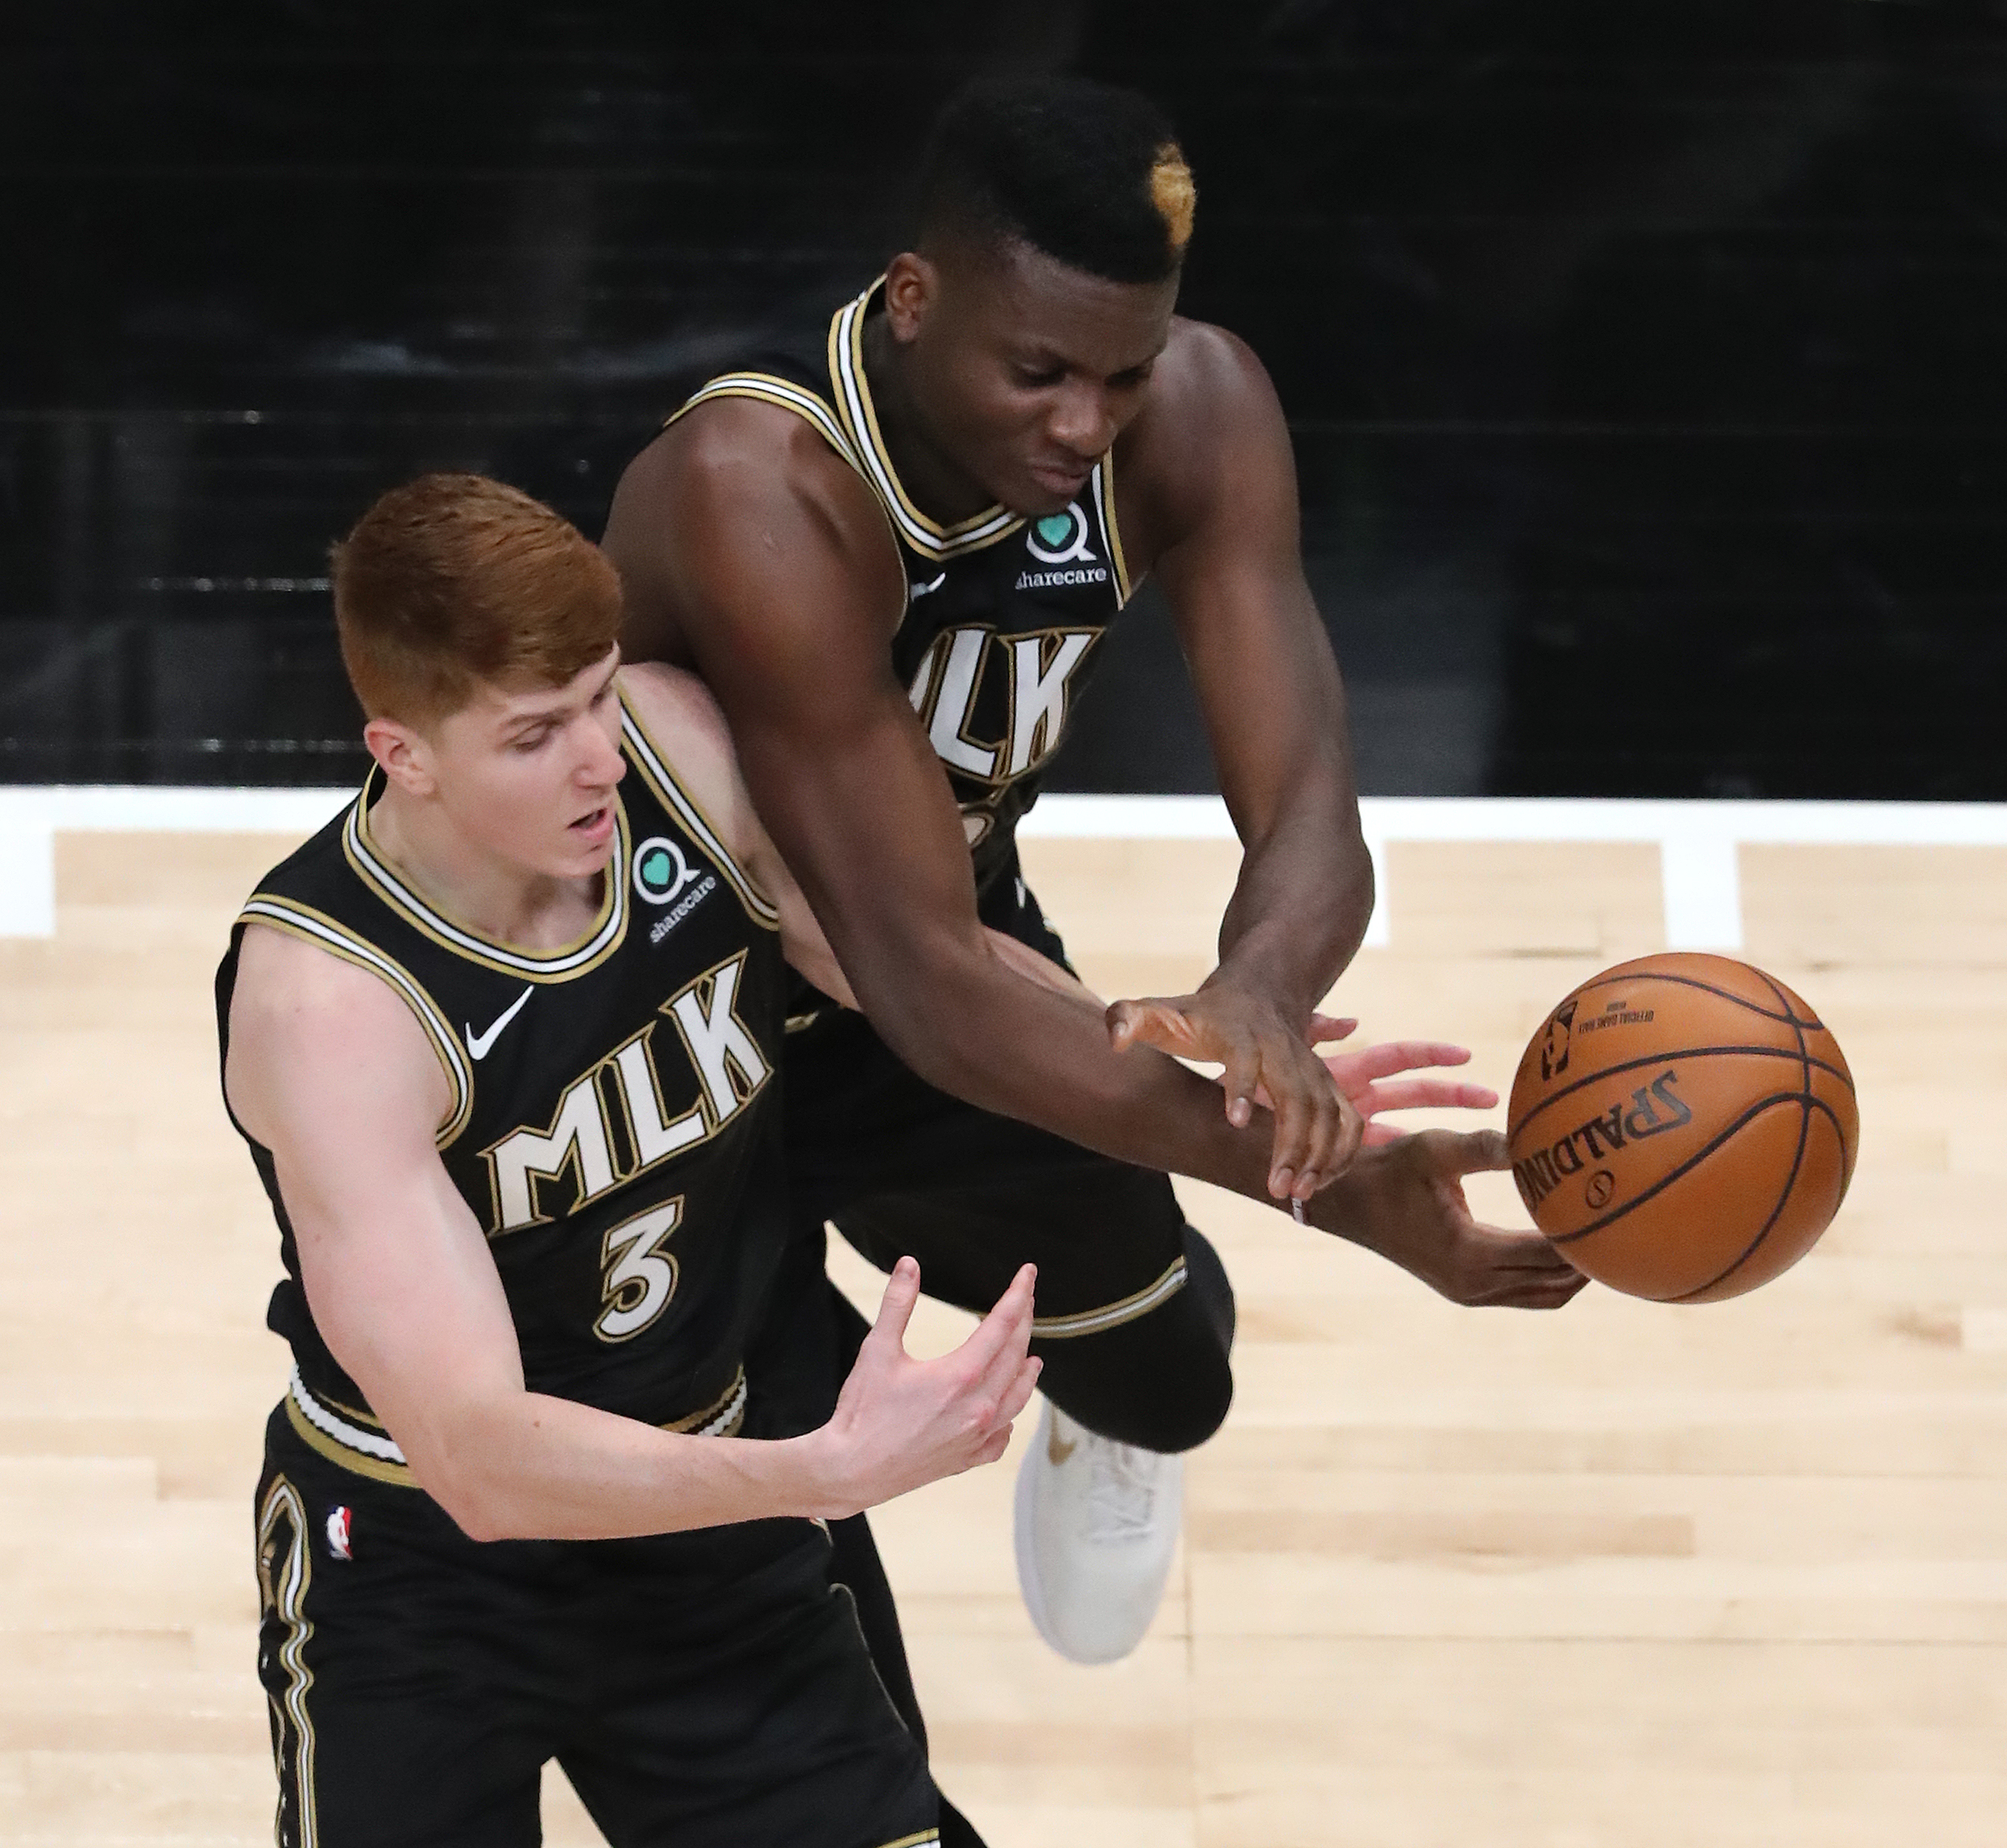 NBA on MLK Day 2021: Atlanta Hawks earn their letters with win over  Minnesota Timberwolves in uniforms honouring MLK